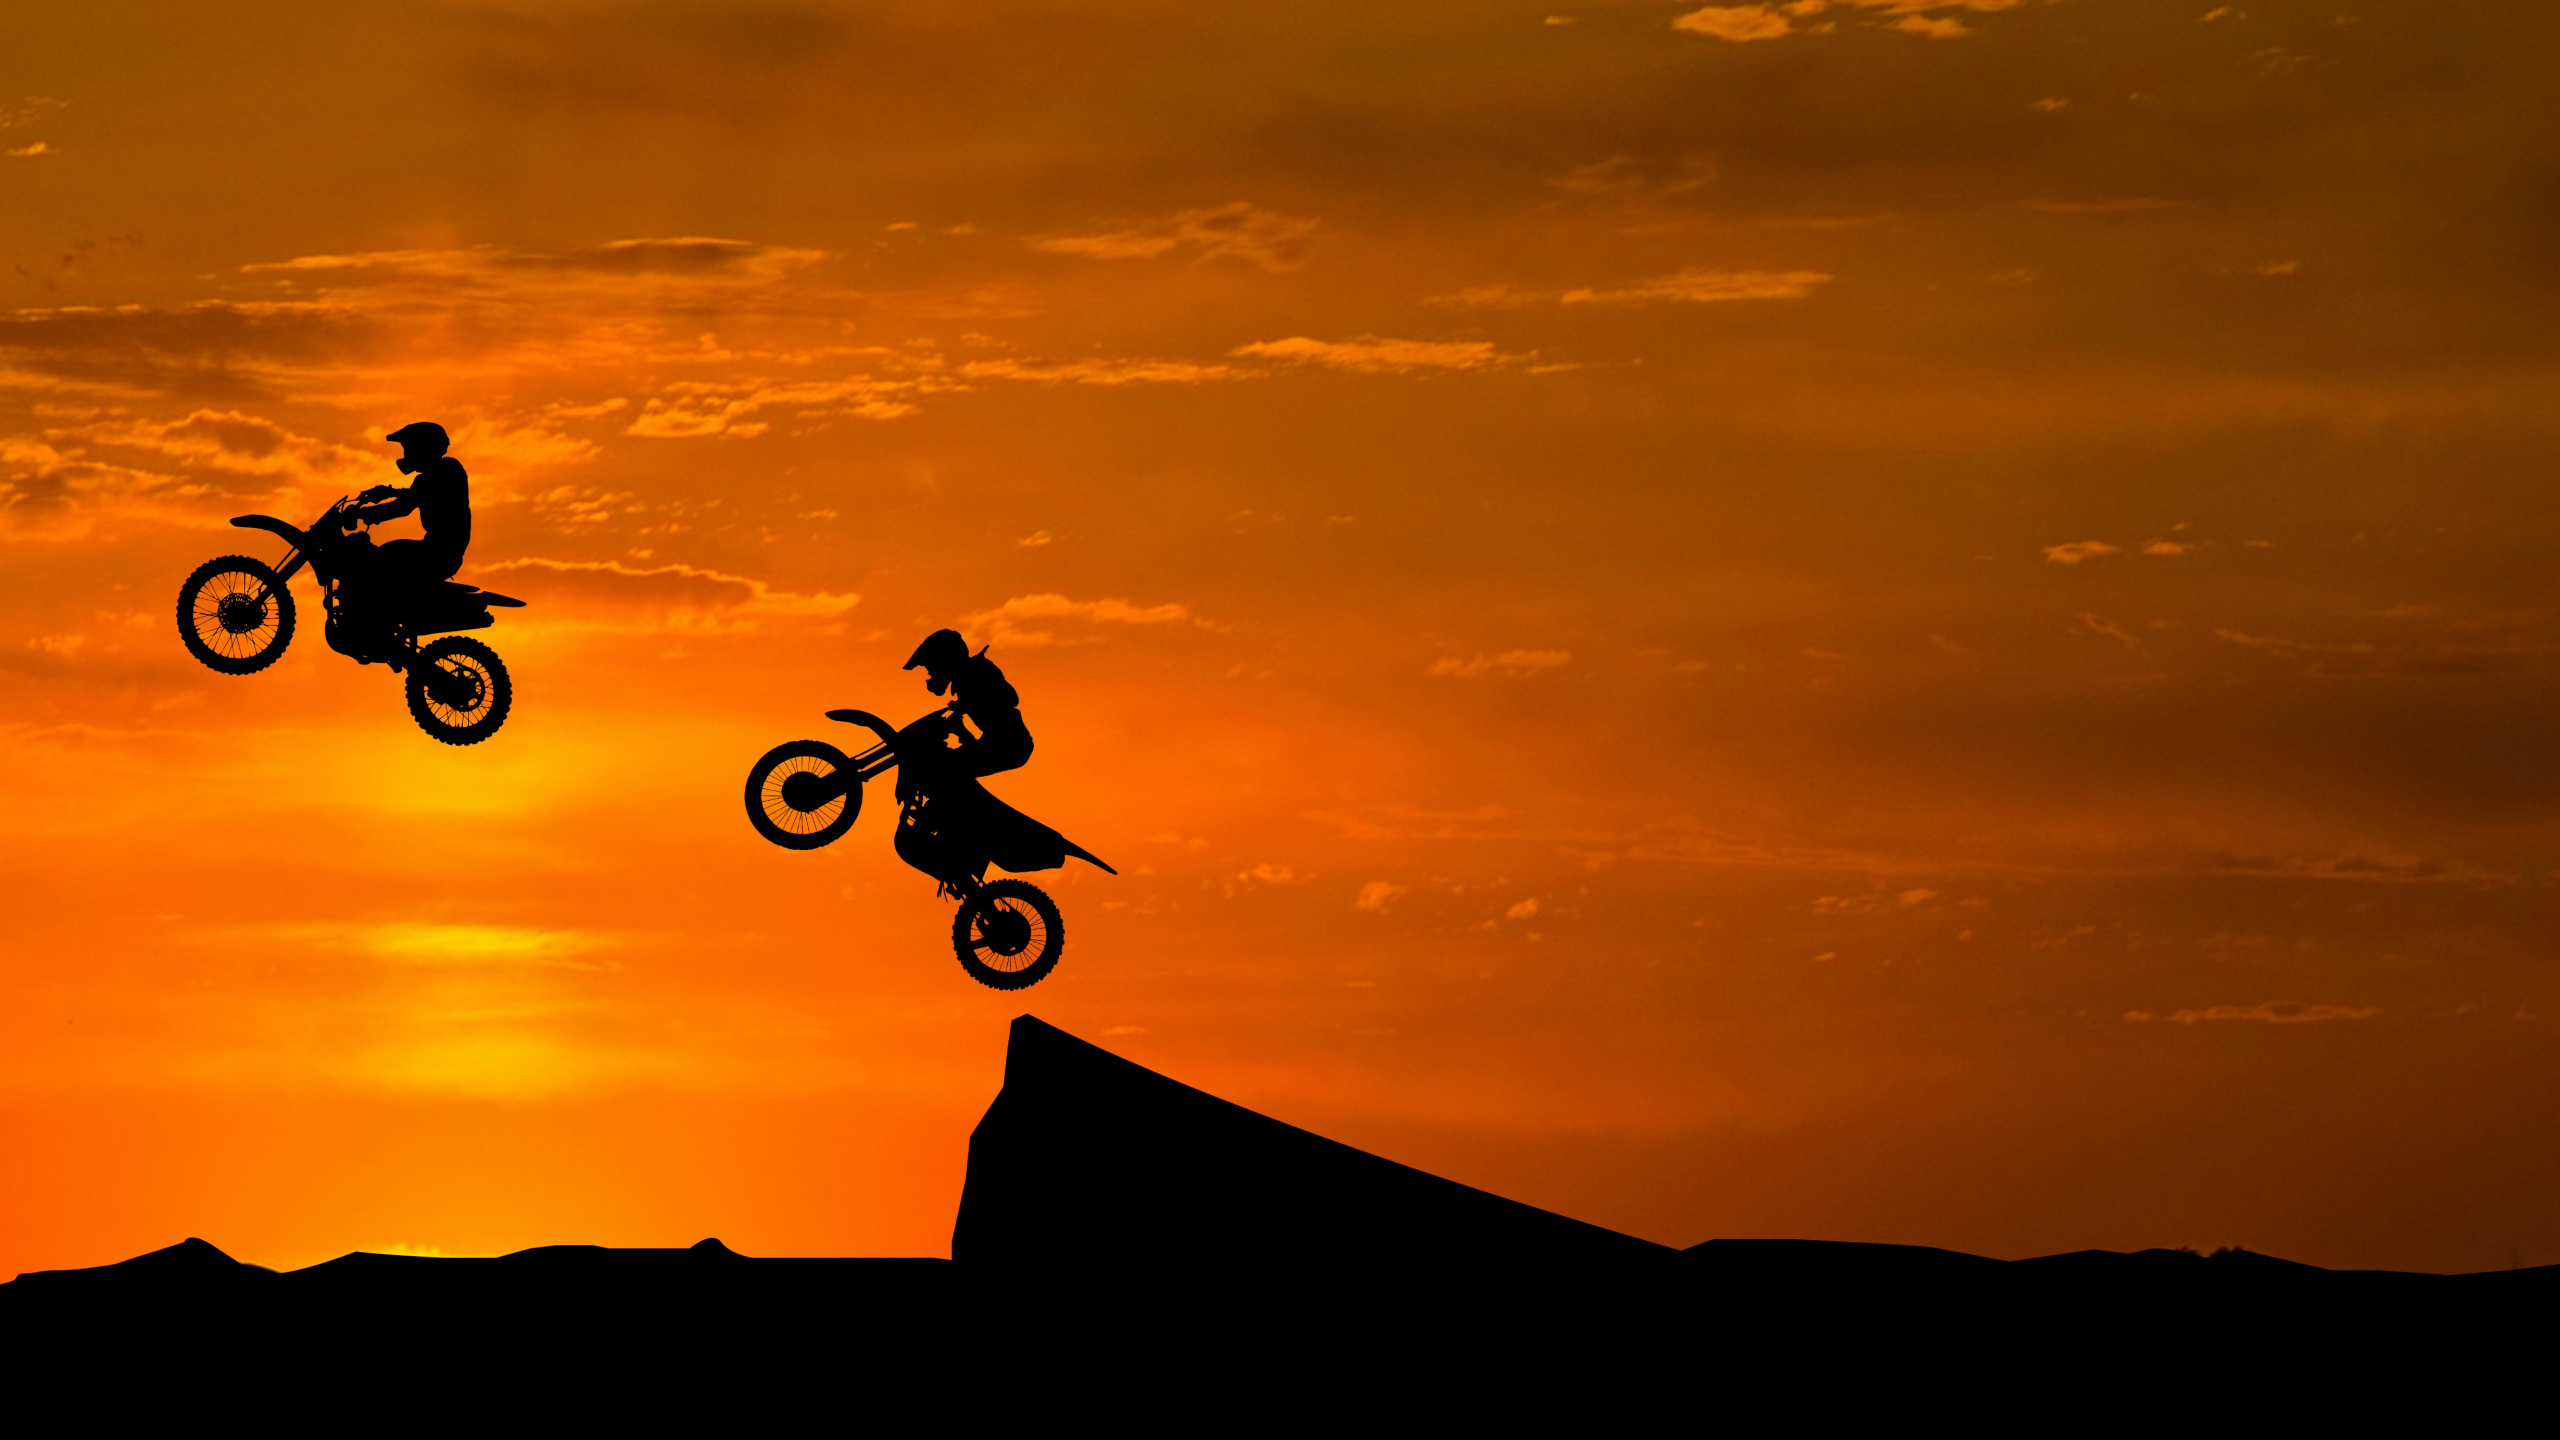 Silhouette of Man Riding Bicycle on Mountain During Sunset. Wallpaper in 2560x1440 Resolution